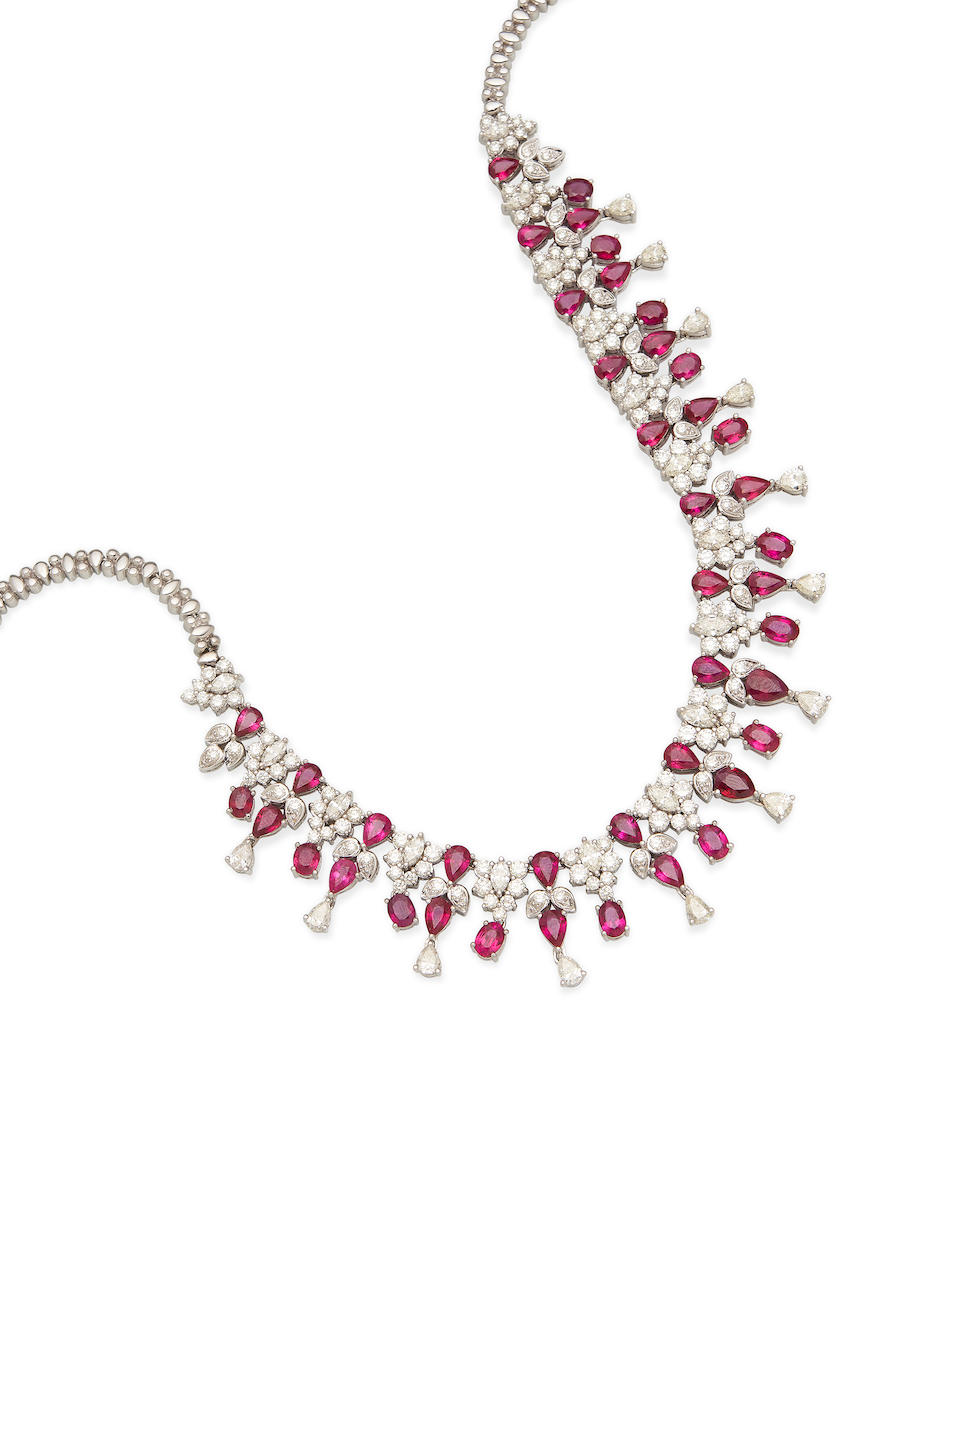 A SPLENDID RUBY AND DIAMOND NECKLACE